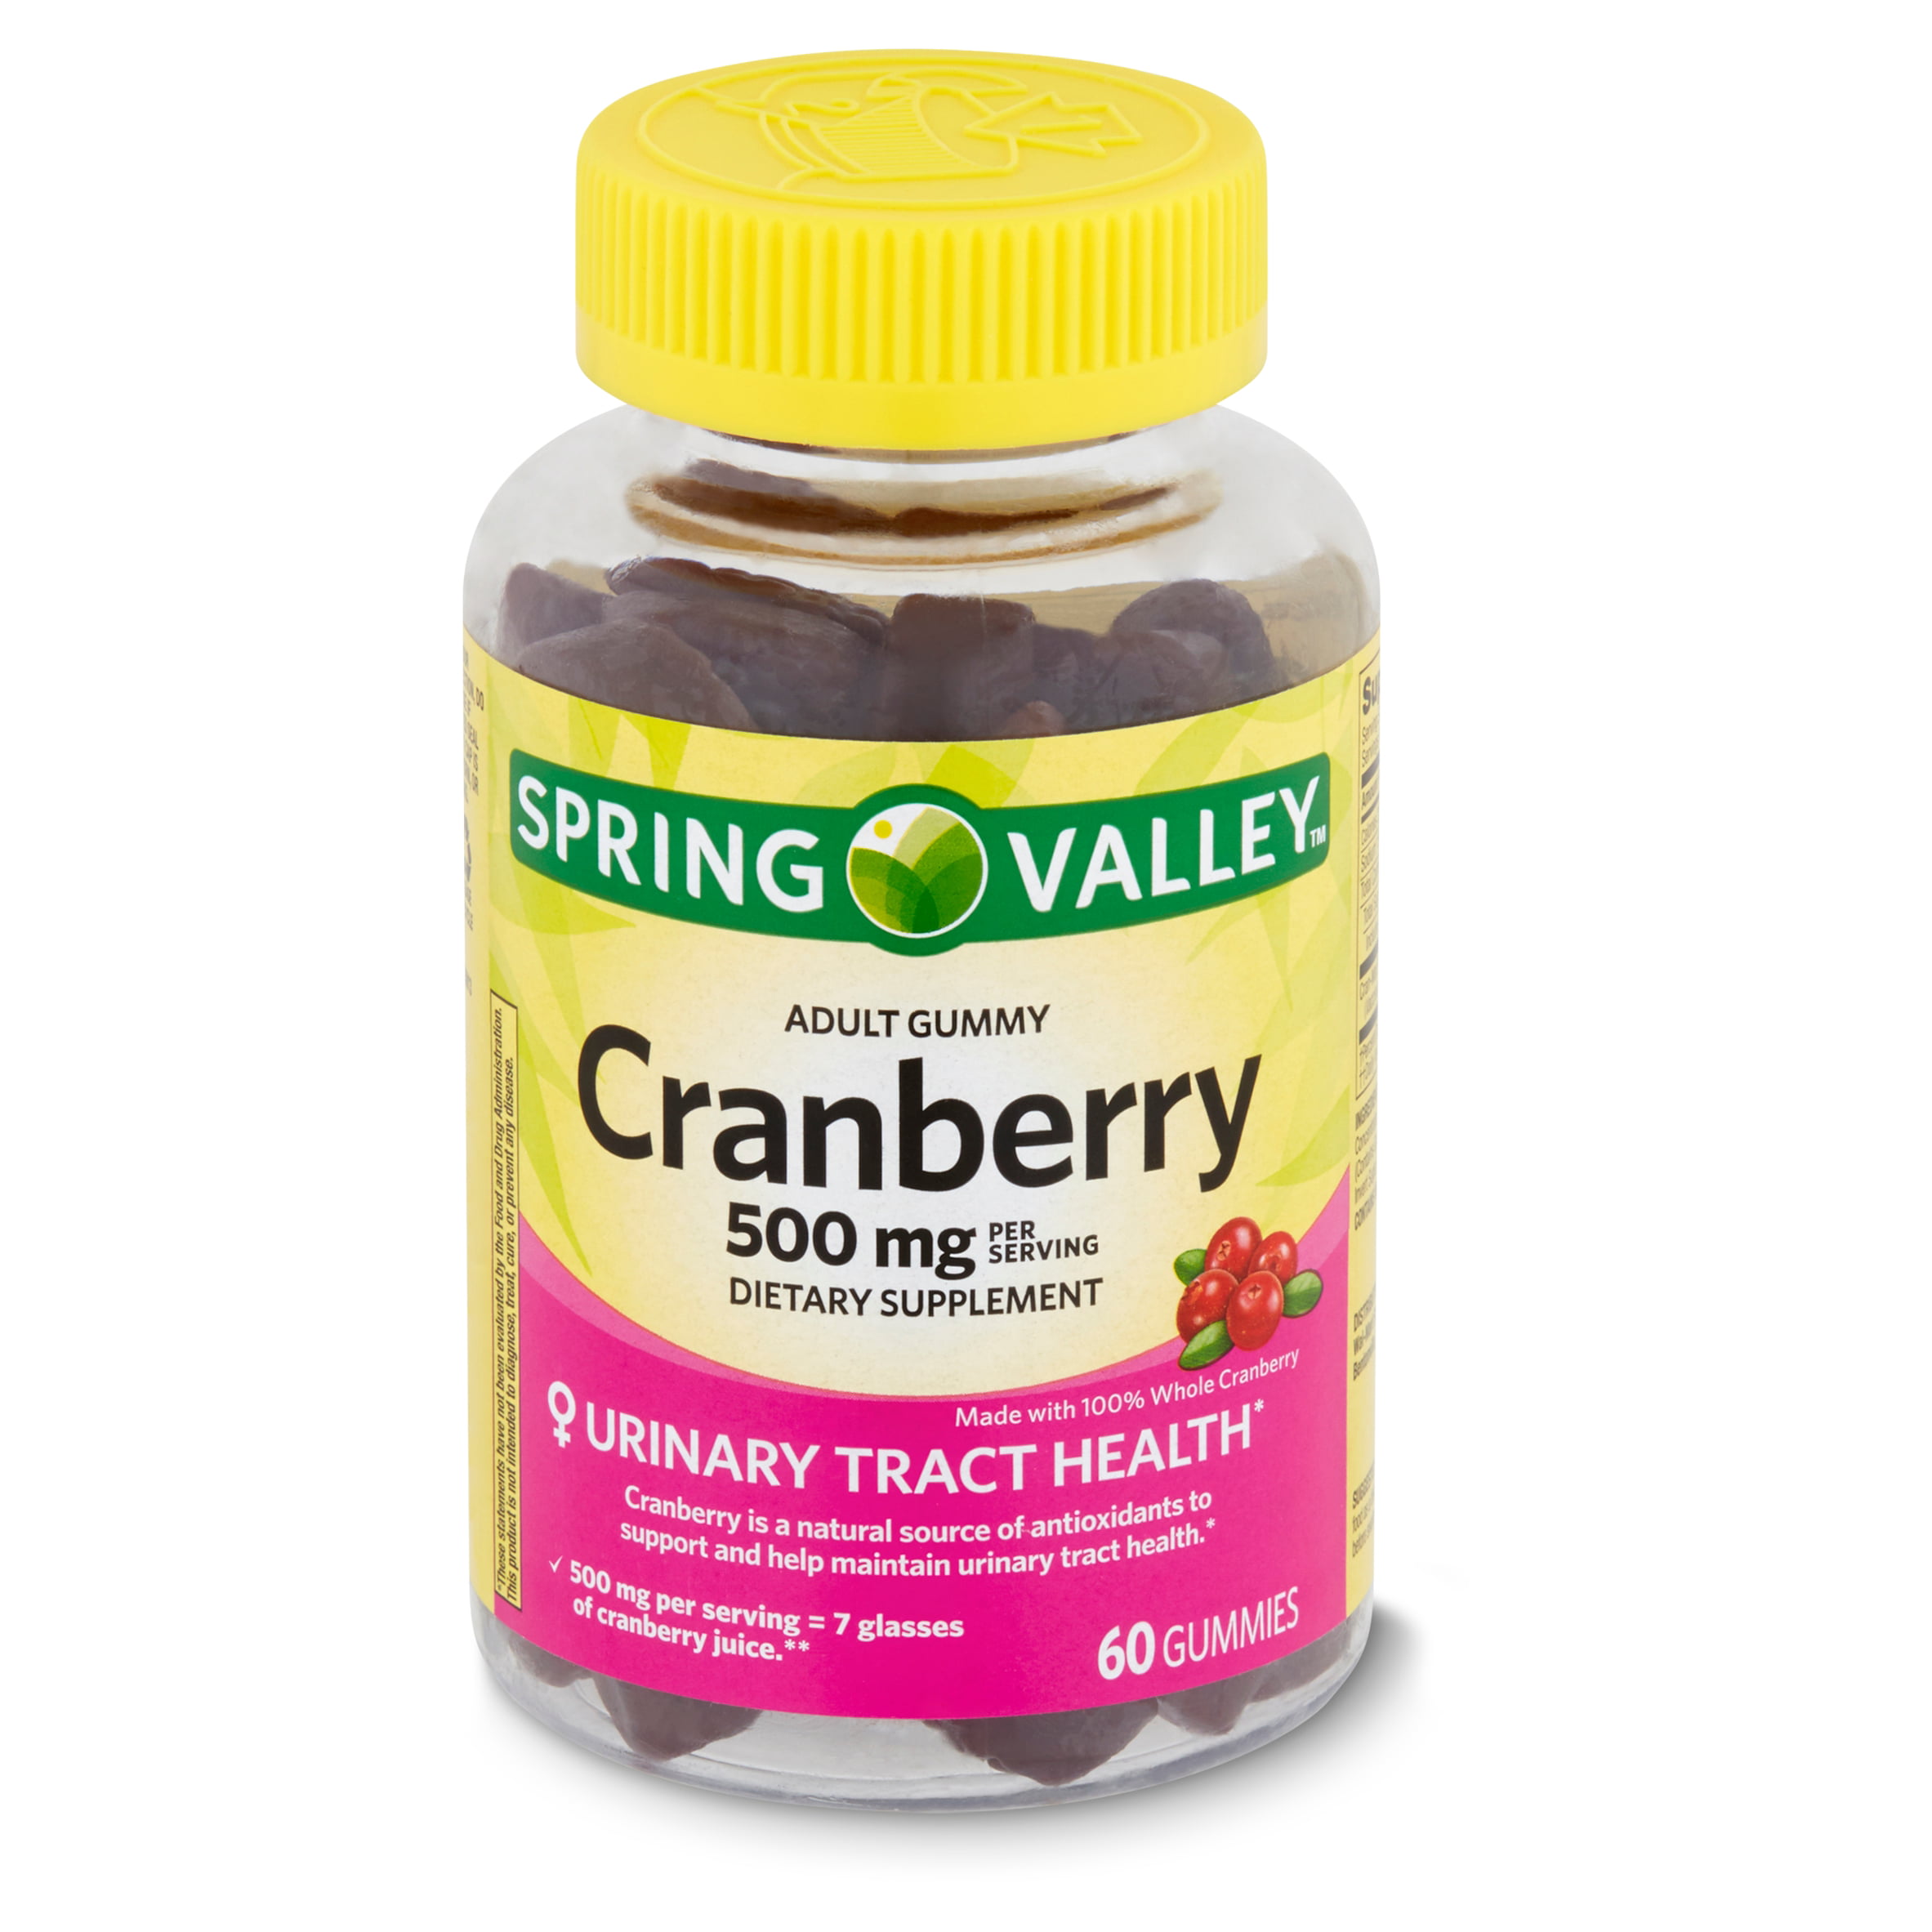 Spring Valley Adult Gummy Cranberry Dietary Supplement, 500 mg, 60 ...